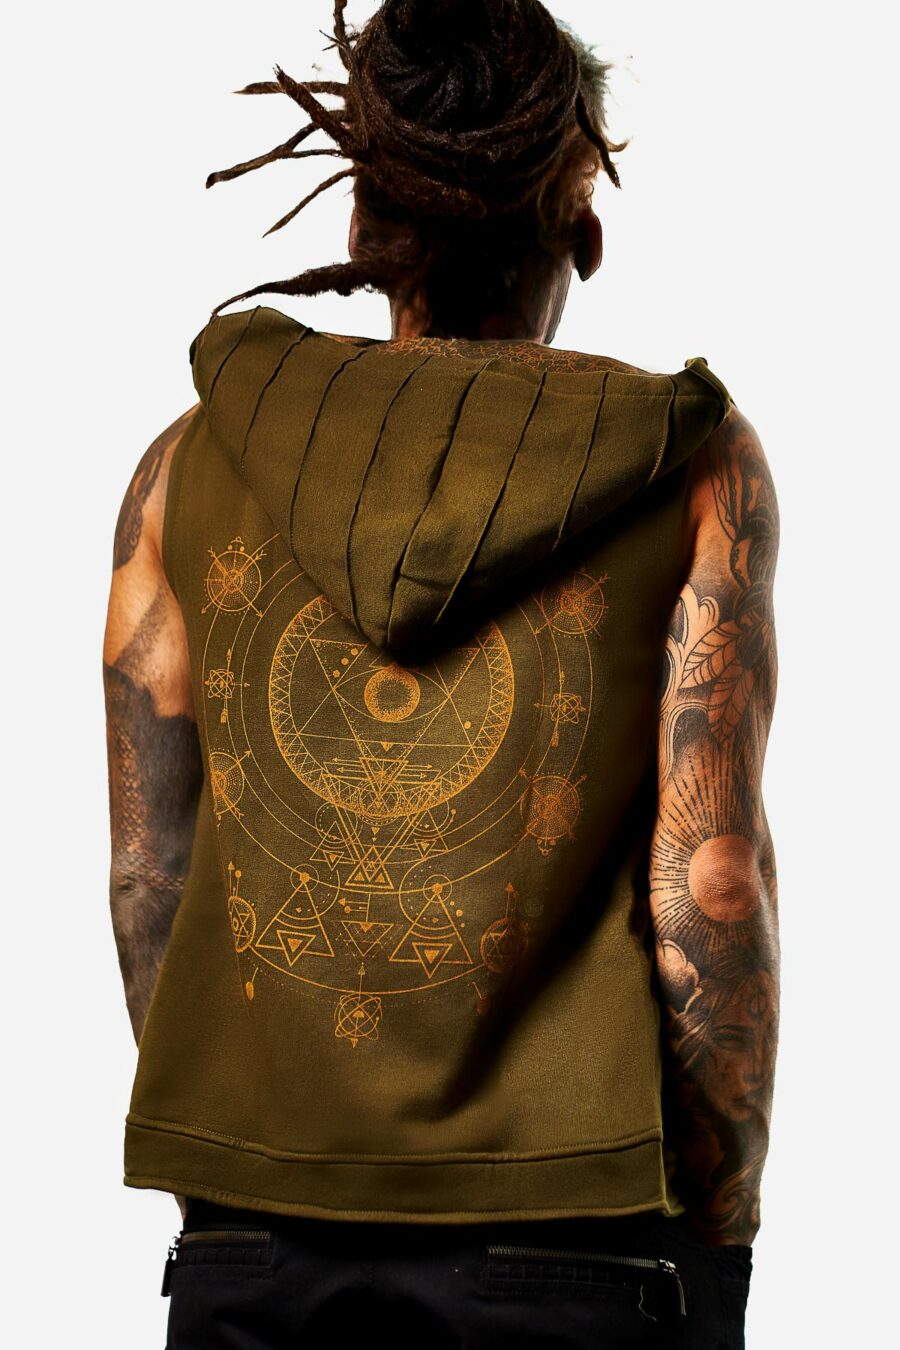 Explore Avanyah Clothing for the green Tan Thora vest for men, showcasing exclusive handmade silk screen art, perfect for festival goers and lovers of alternative streetwear.